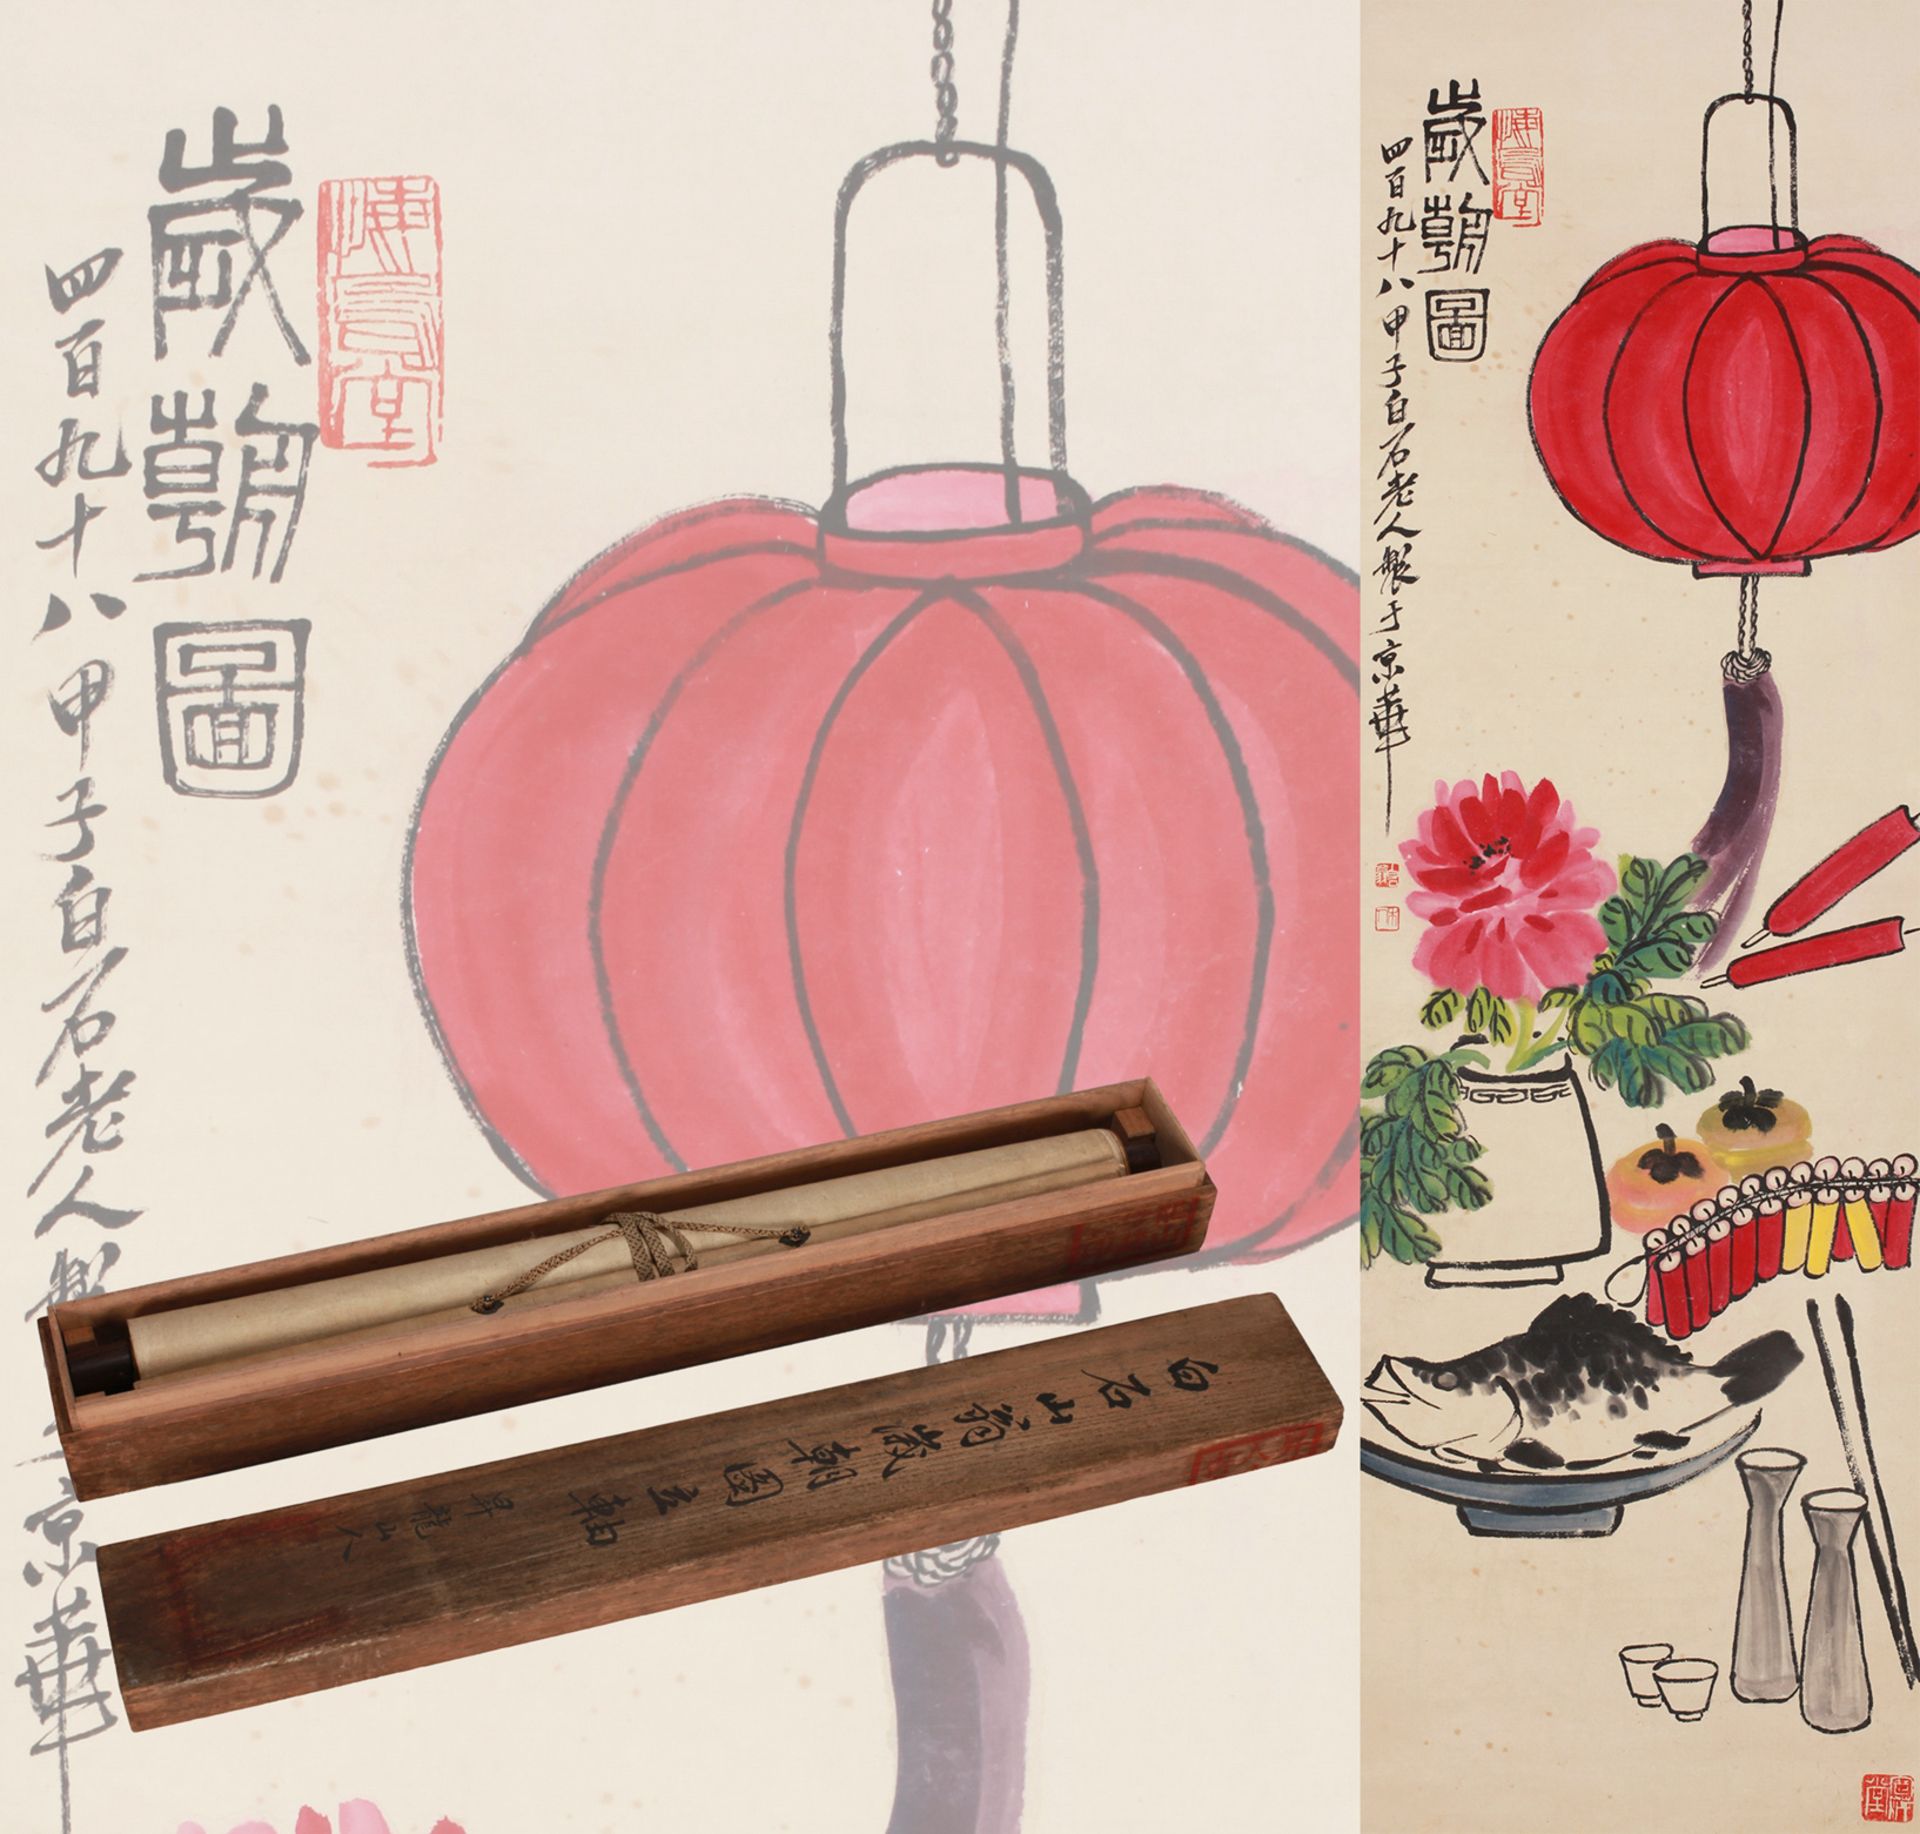 A Chinese Scroll Painting By Qi Baishi - Image 2 of 14